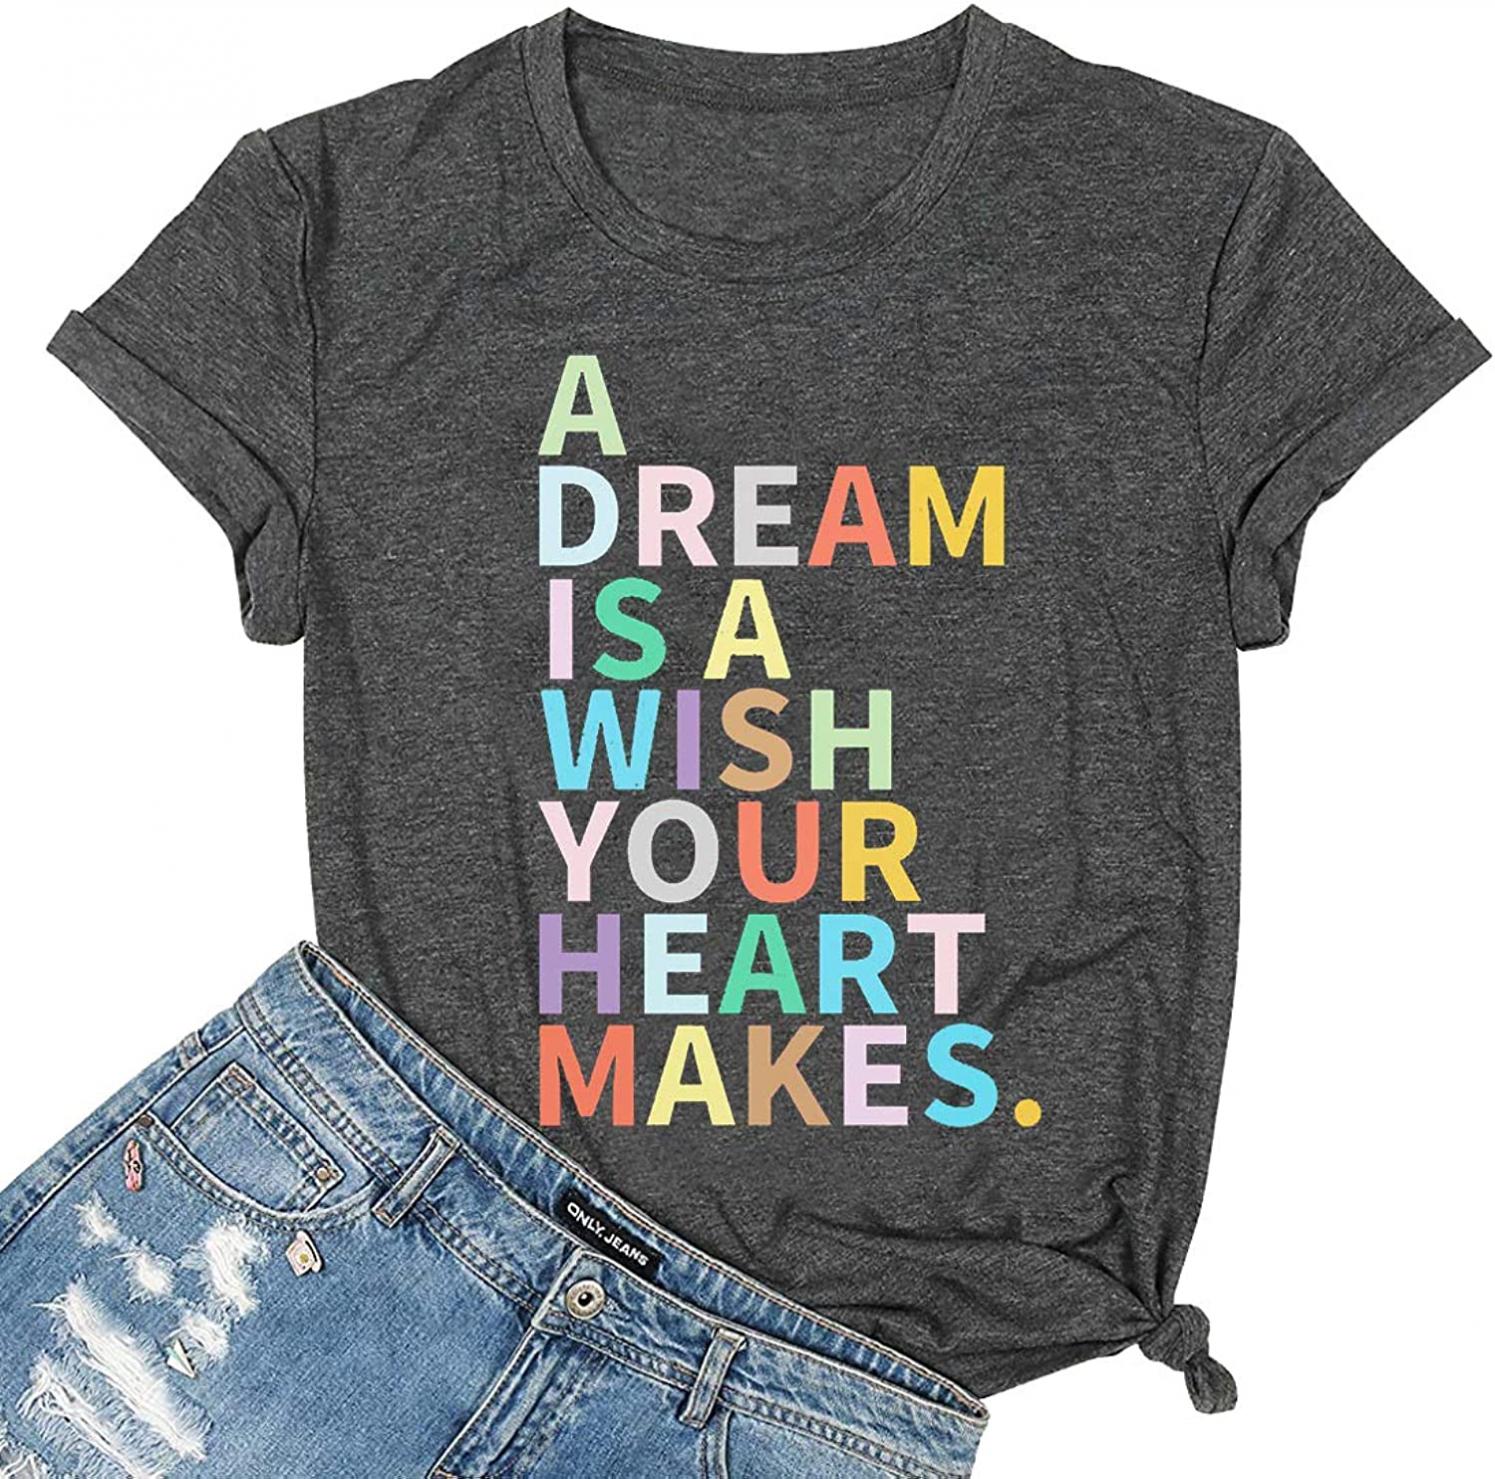 A Dream is A Wish Your Heart Makes Shirt Women Funny Letter Print T Shirts Casual Short Sleeve Tee Tops